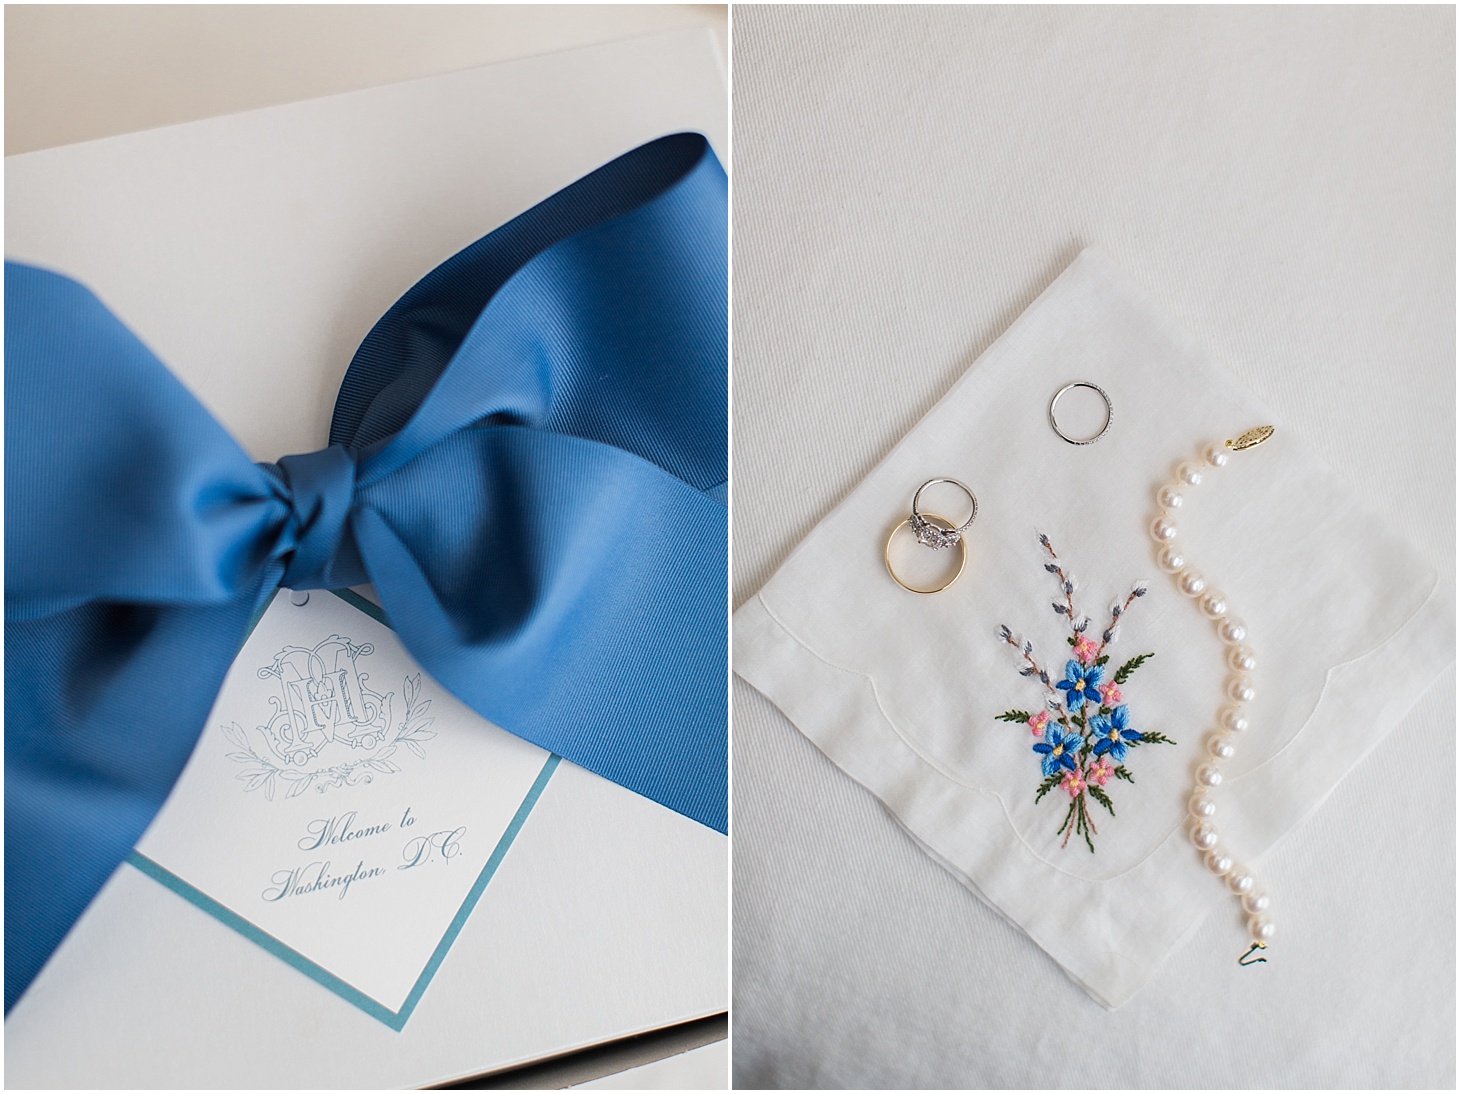 Bridal Details on vintage handkerchief | Wedding Ceremony at Old Presbyterian Meeting House | Southern Black Tie wedding at St. Regis DC in Dusty Blue and Ivory | Sarah Bradshaw Photography